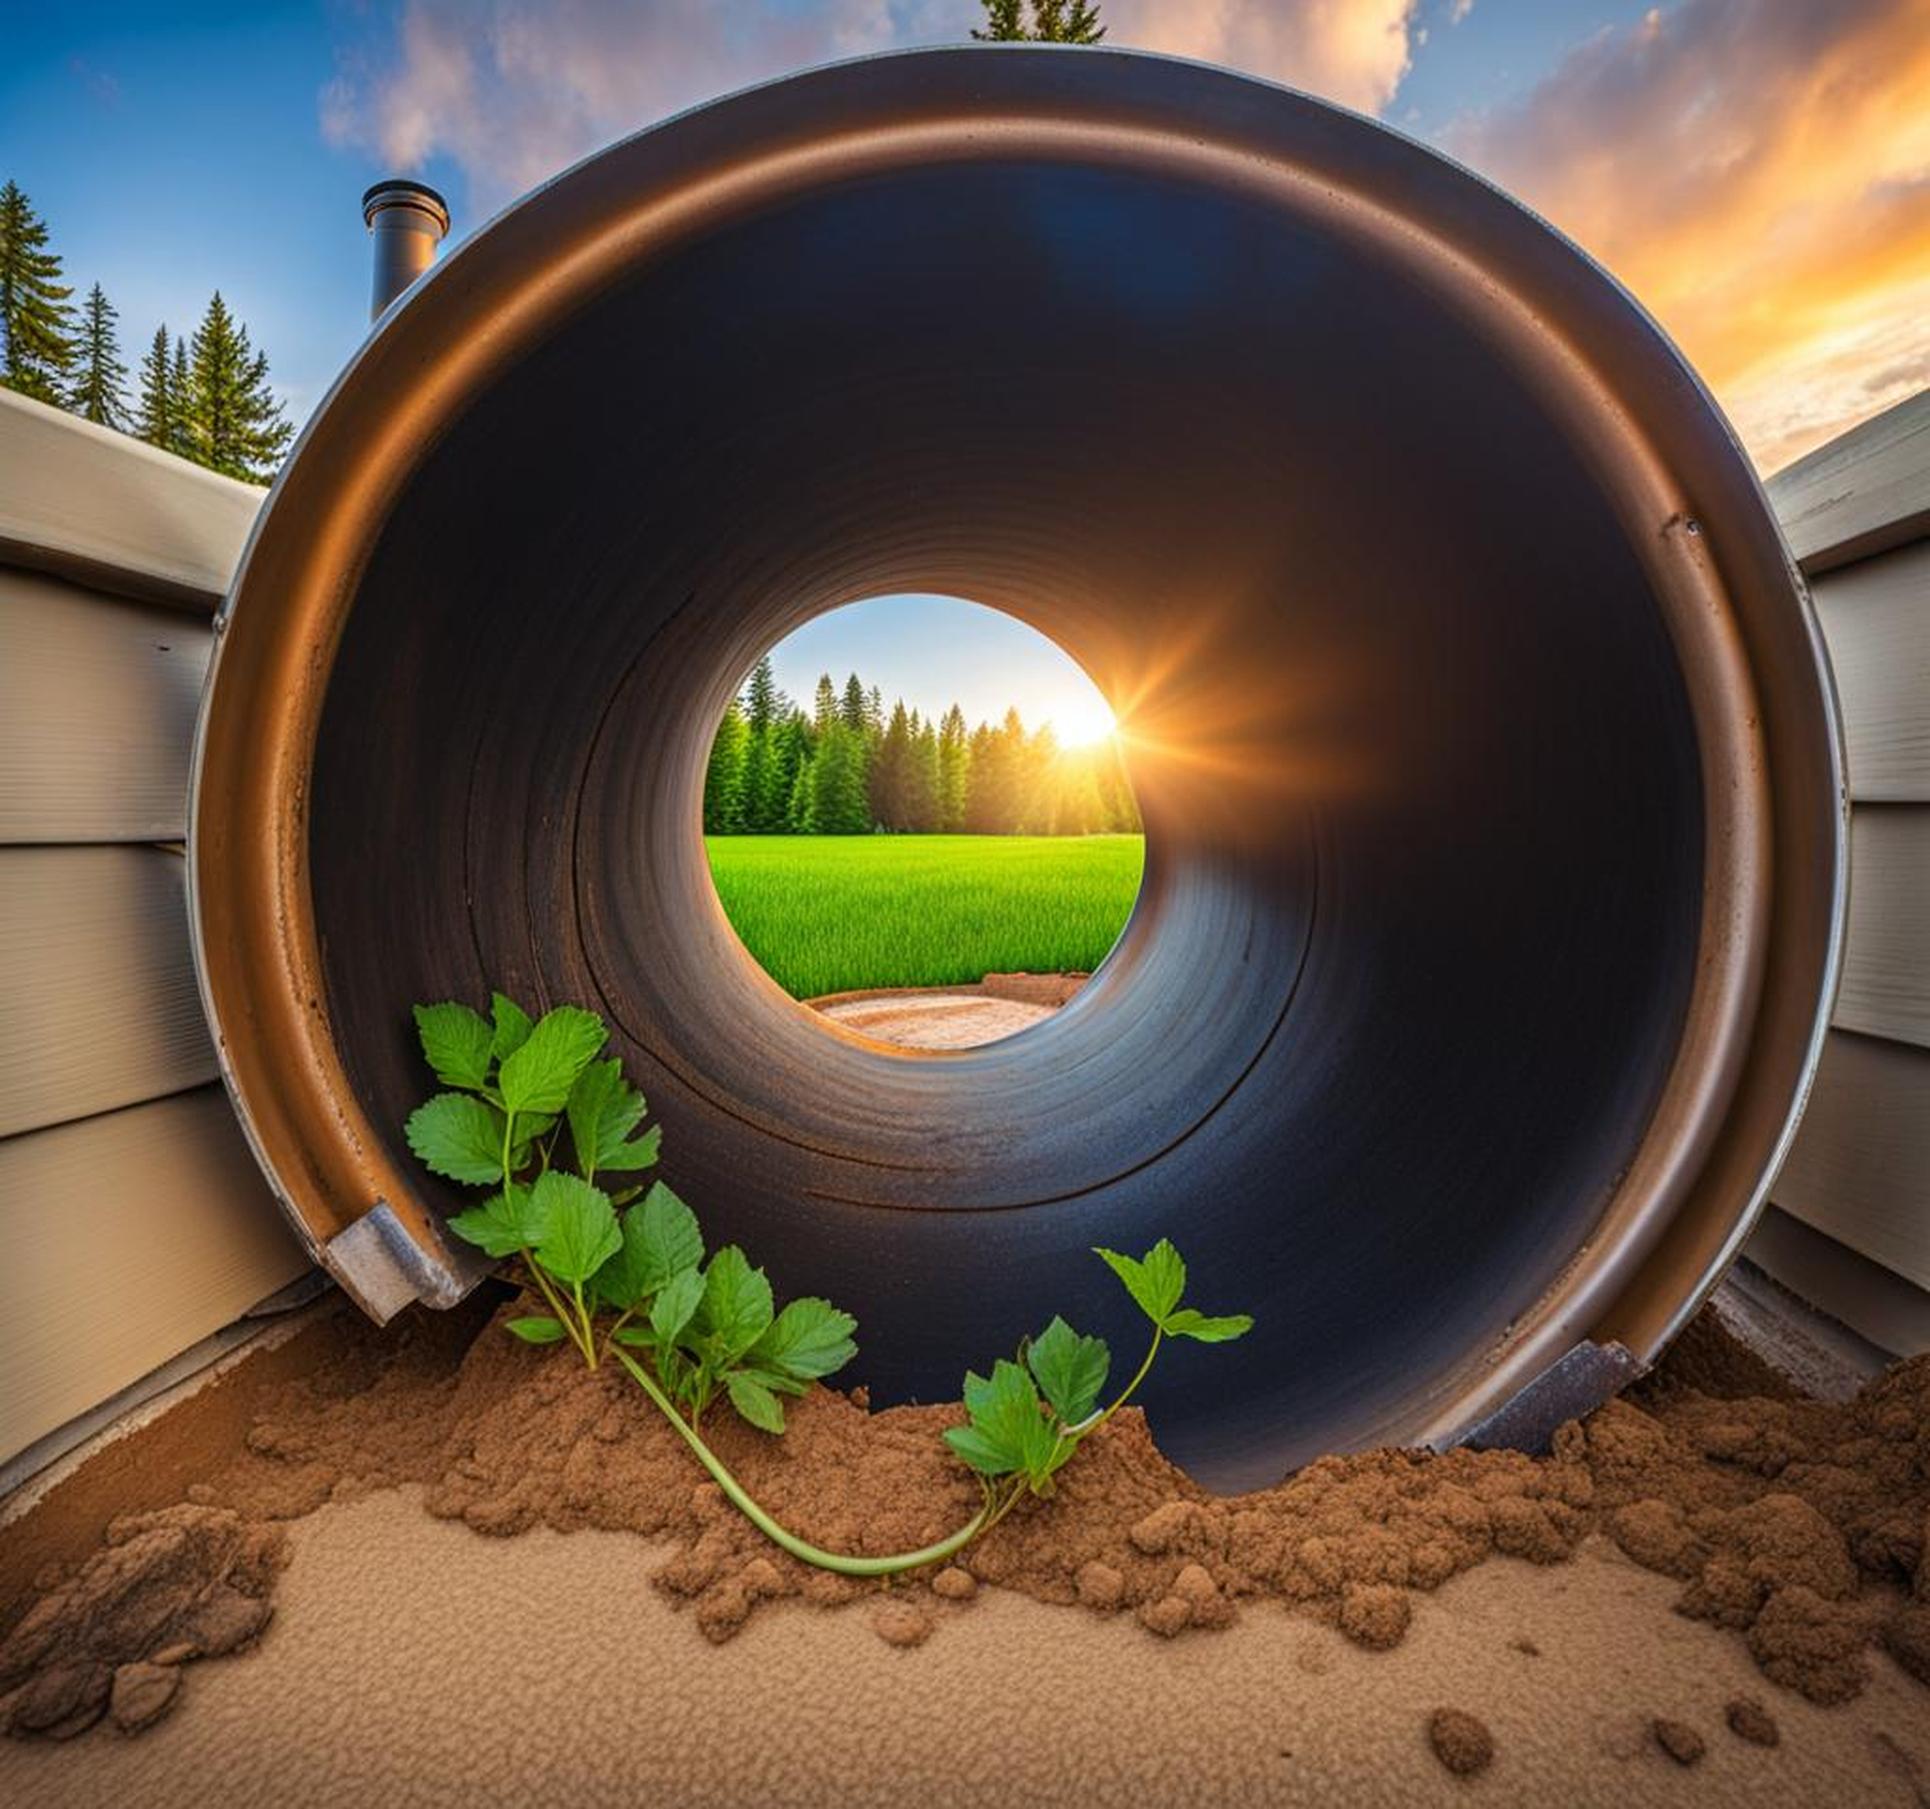 how to unclog a septic tank drain pipe